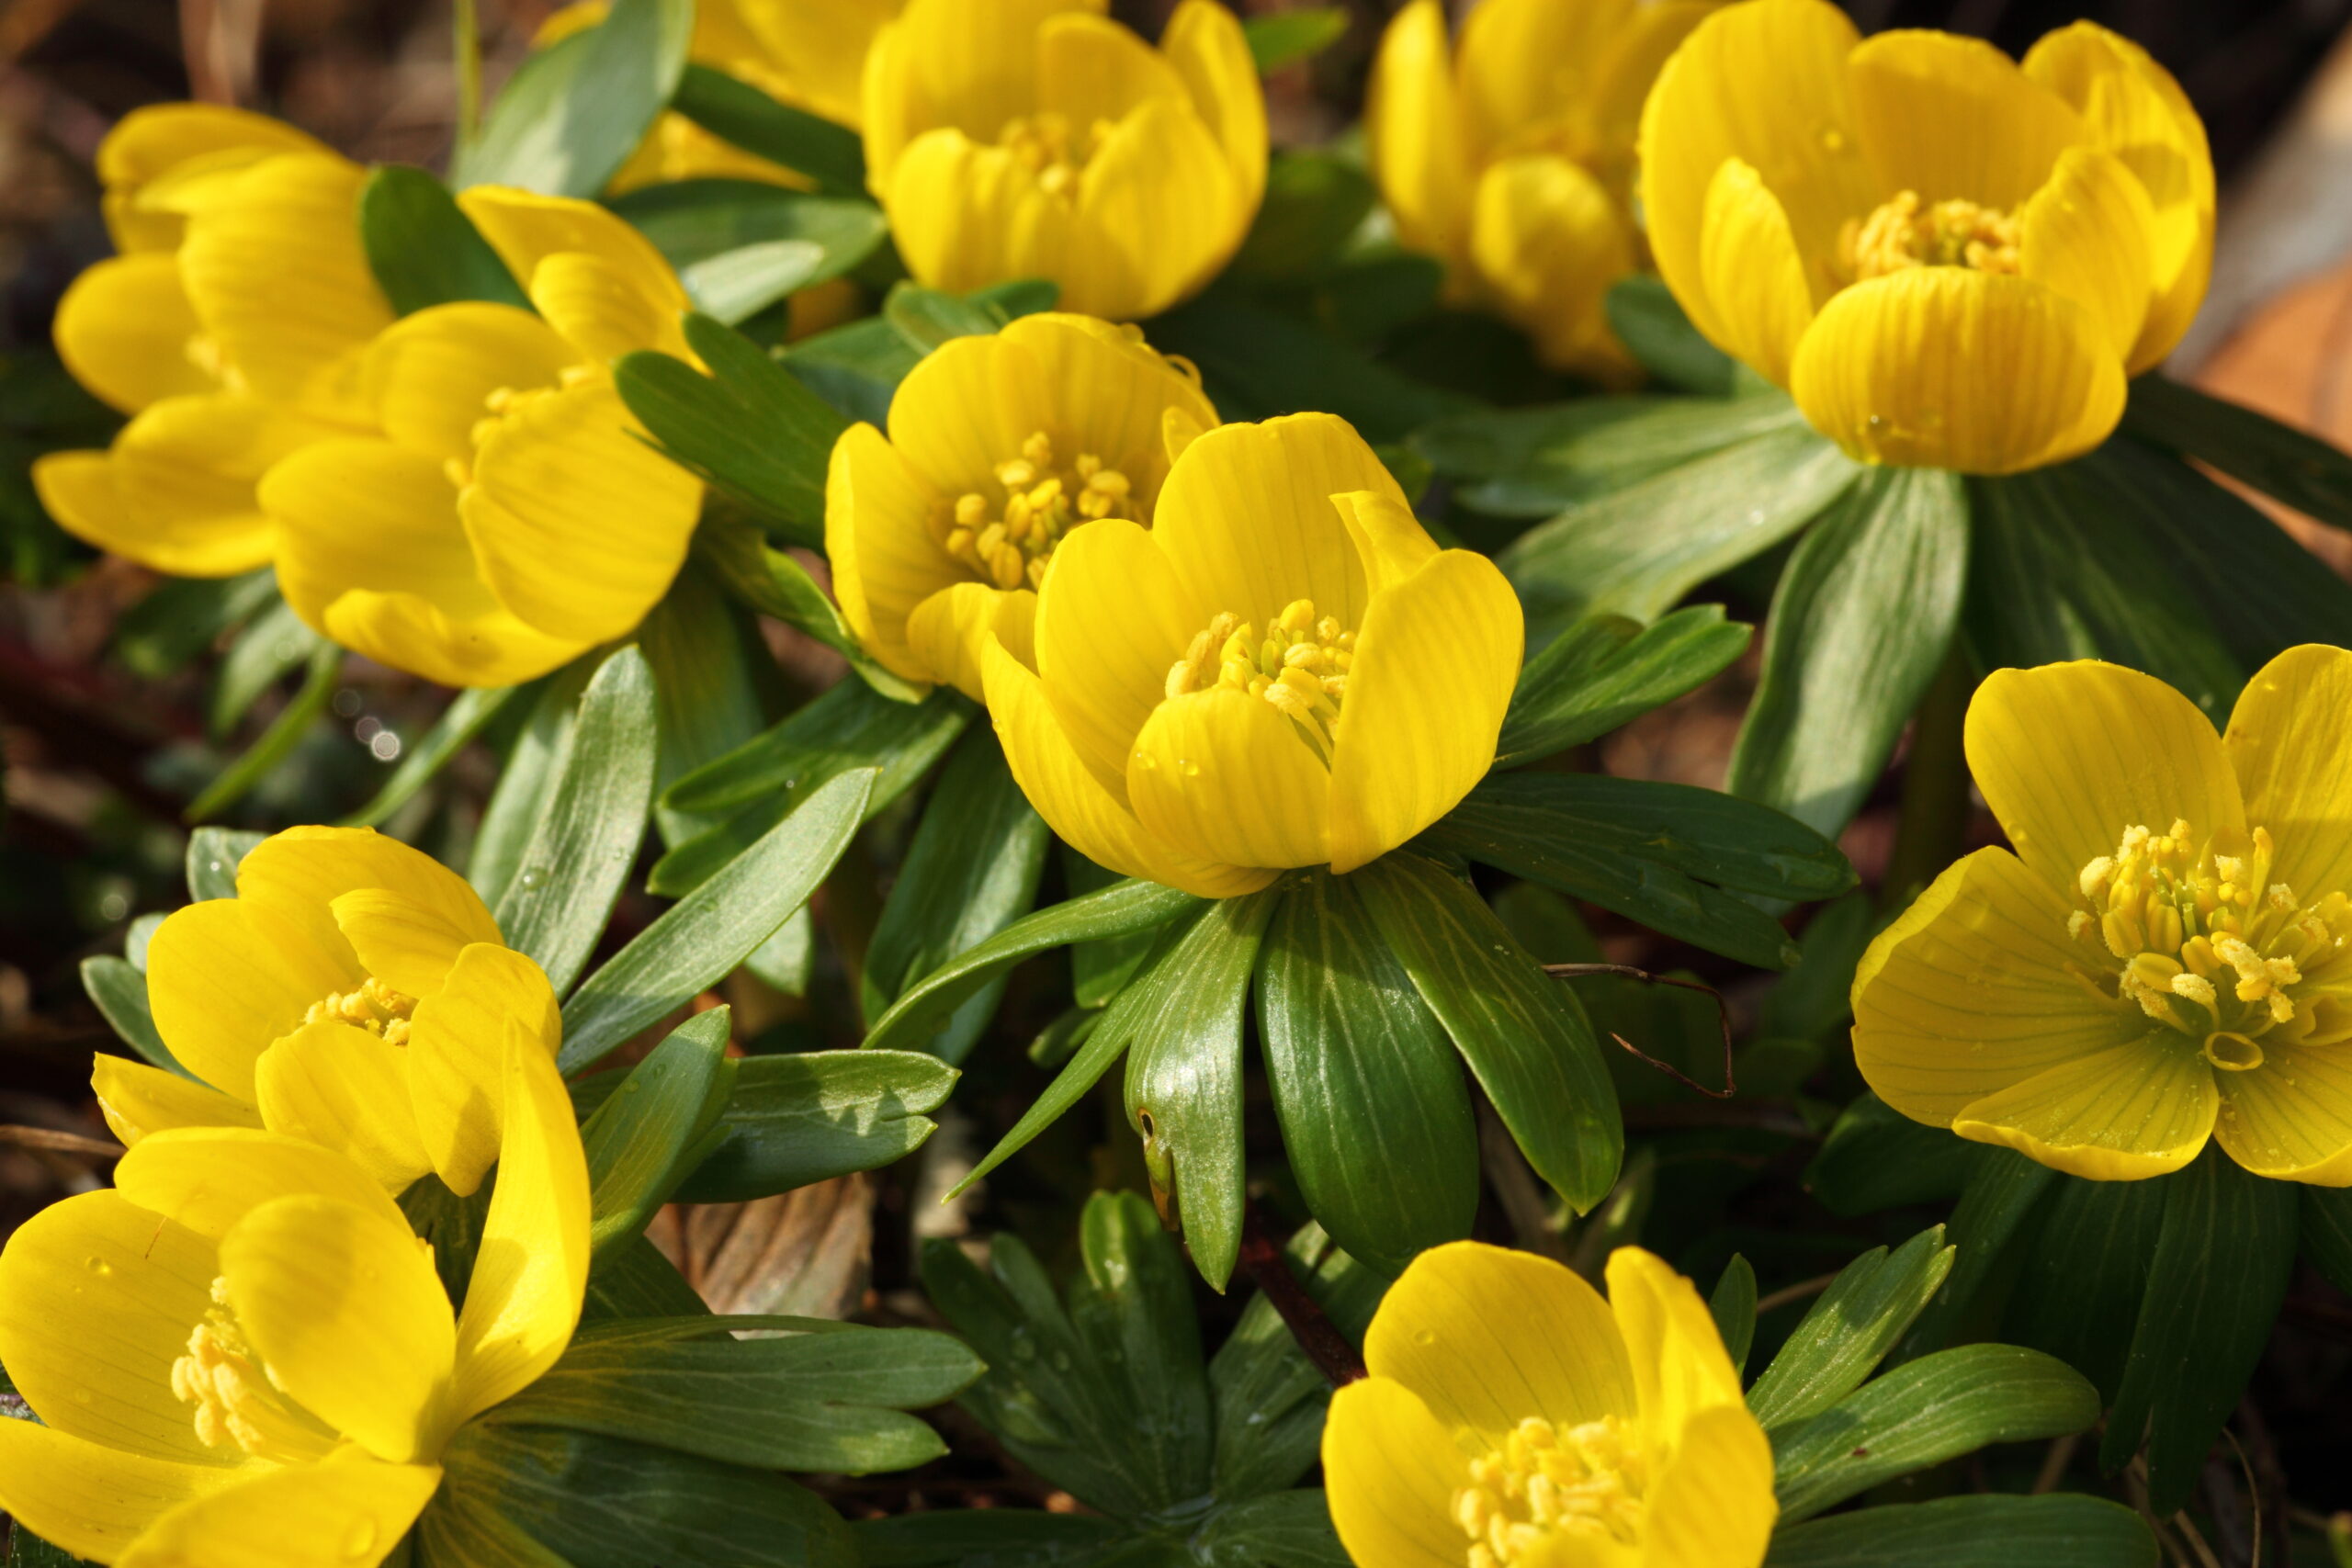 Gardeners’ Holy Grail: winter aconites grow in dry shade under a tree and bring colour to your late winter garden